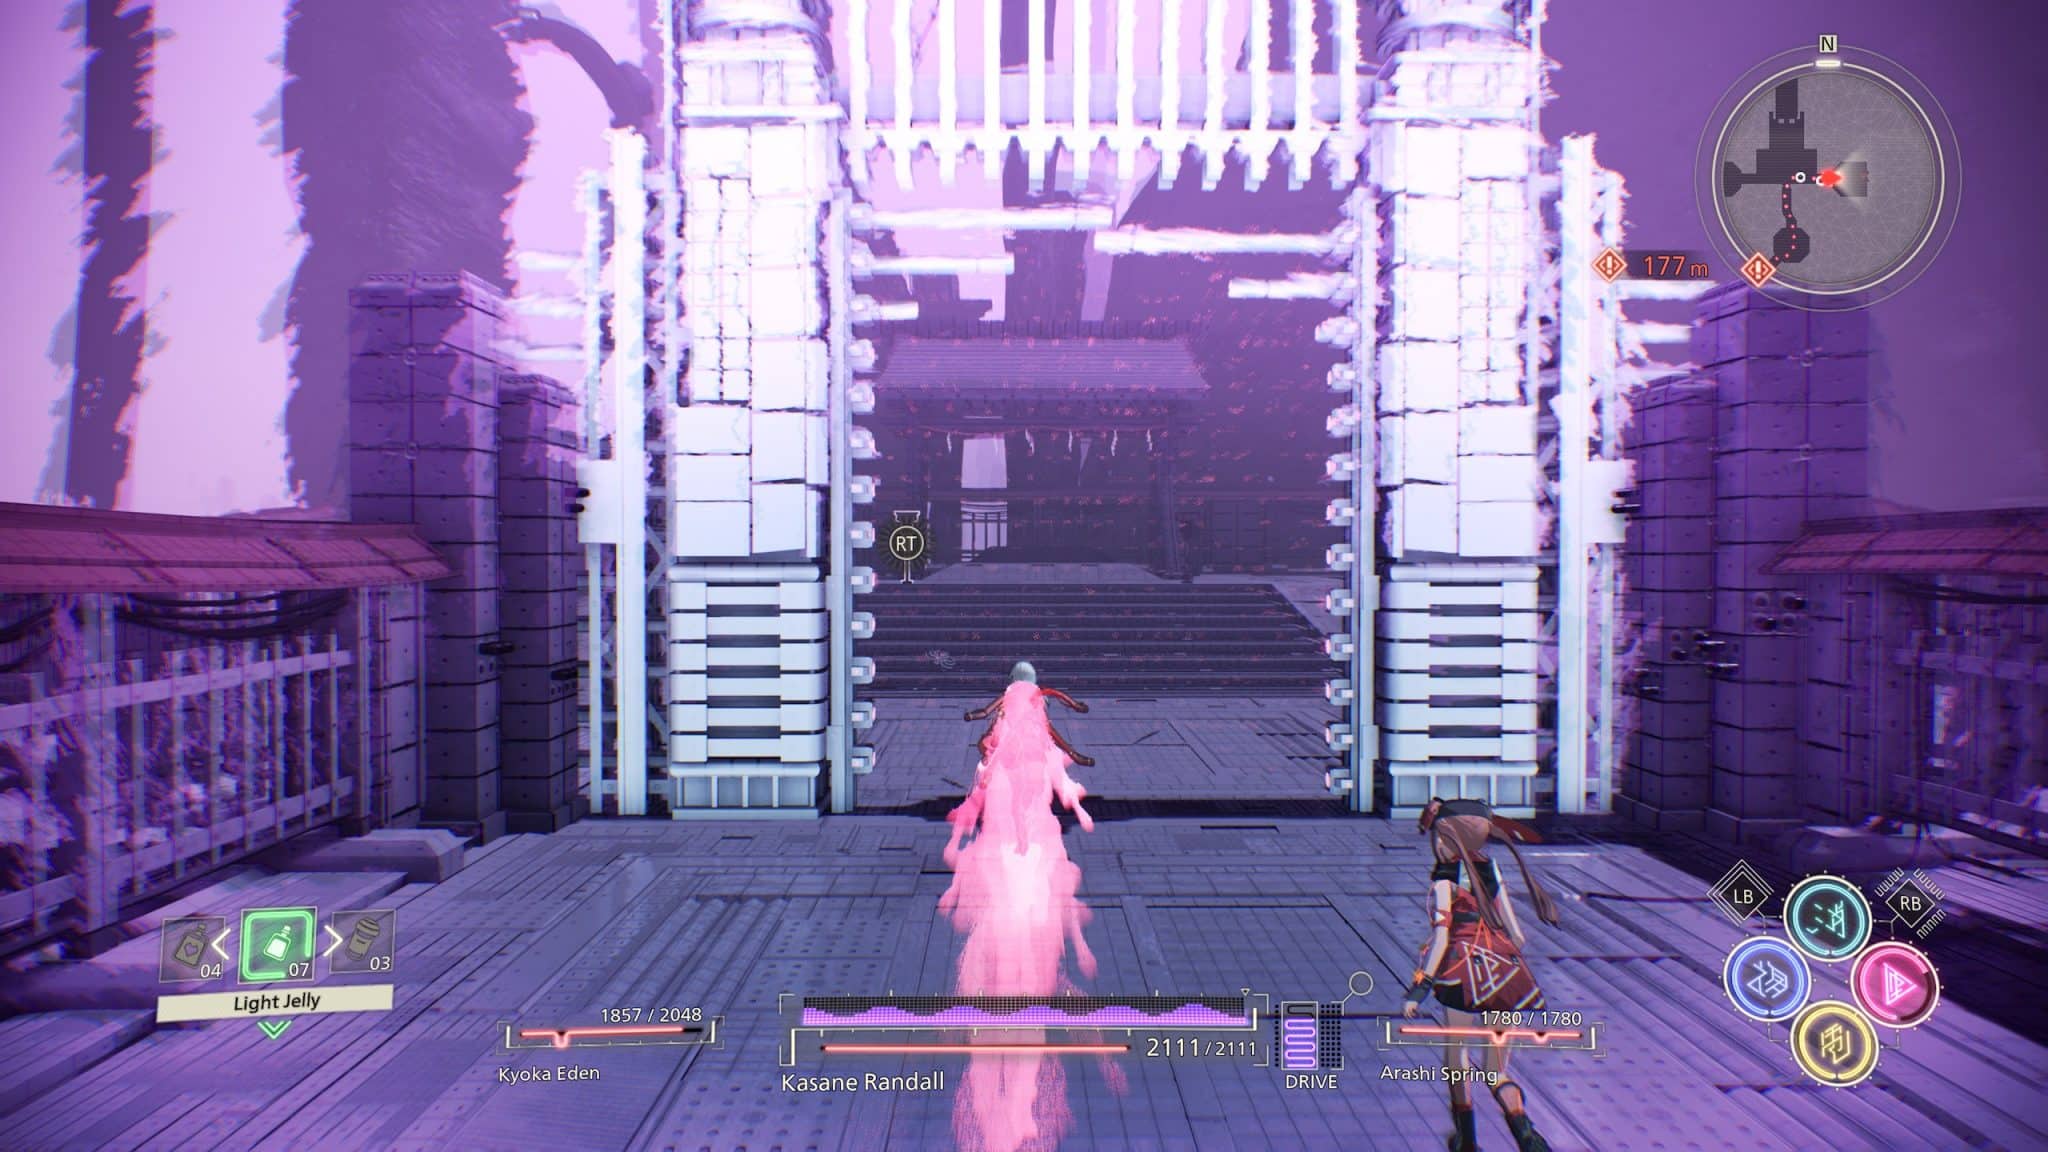 Scarlet Nexus review – Fast and flashy combat can't save this ARPG